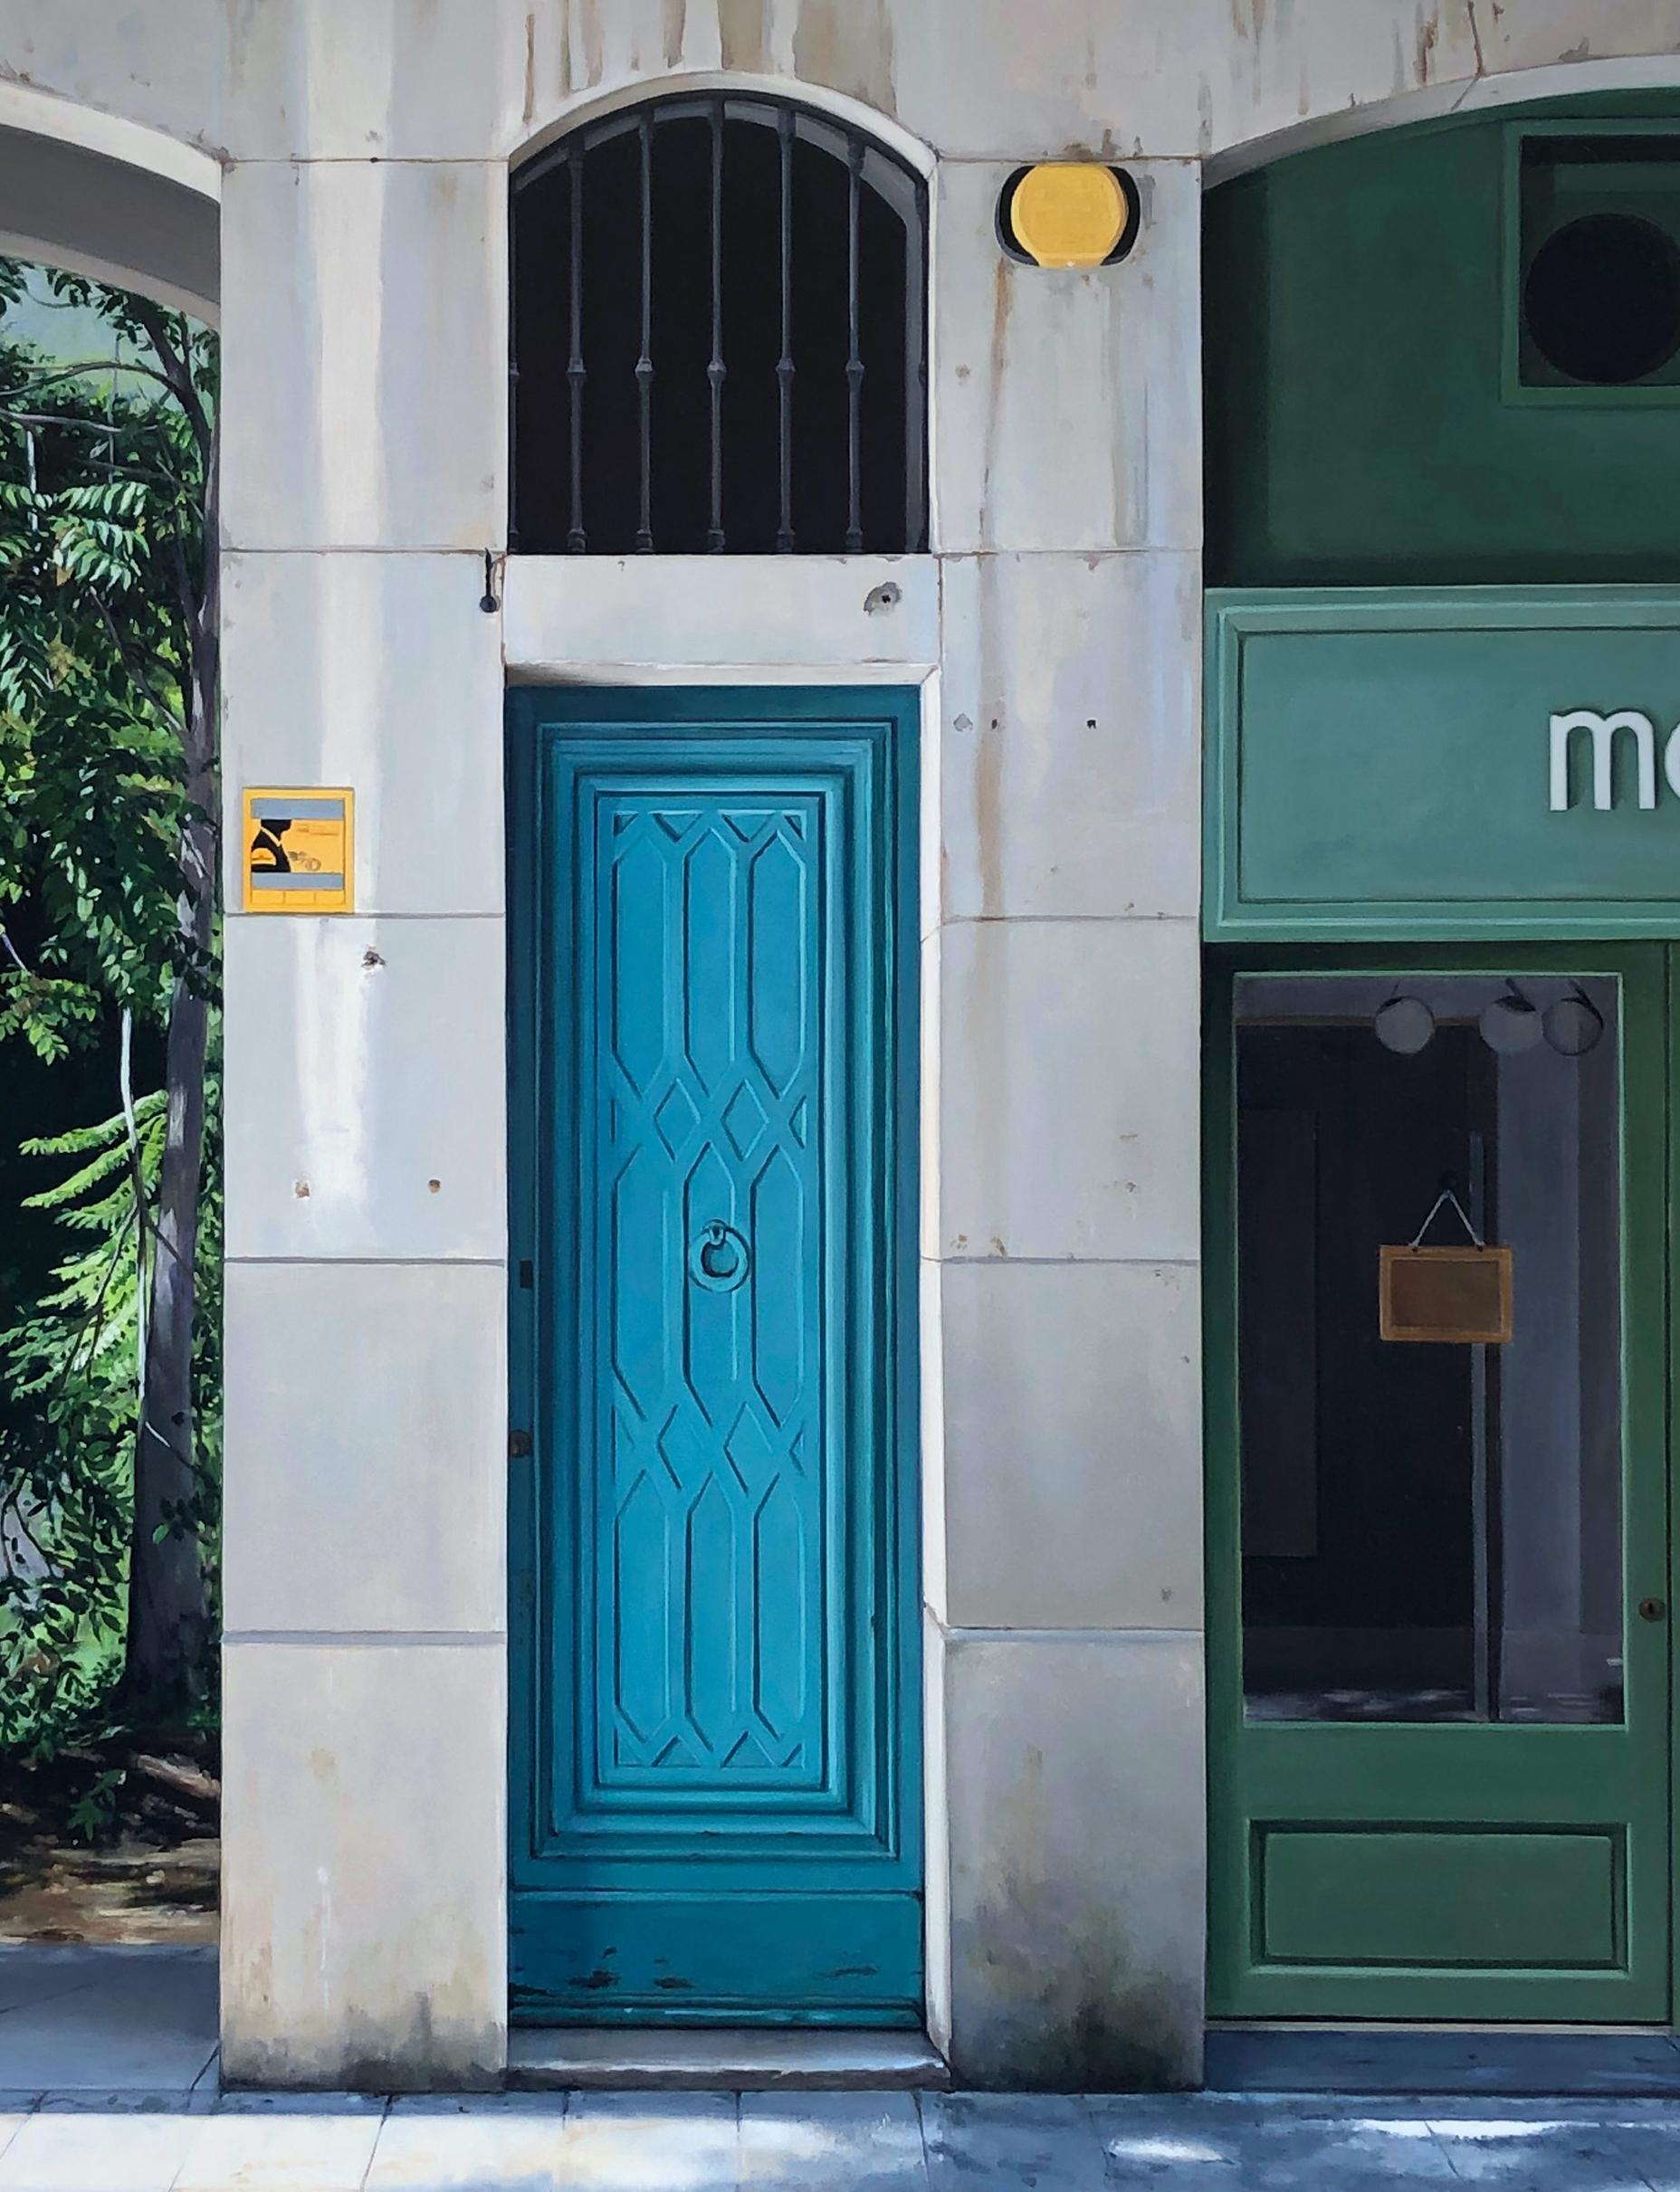 Escapar (To Escape) - Architectural Imagery, Doorways and Lush Tropical Scene - Painting by Carol Pylant